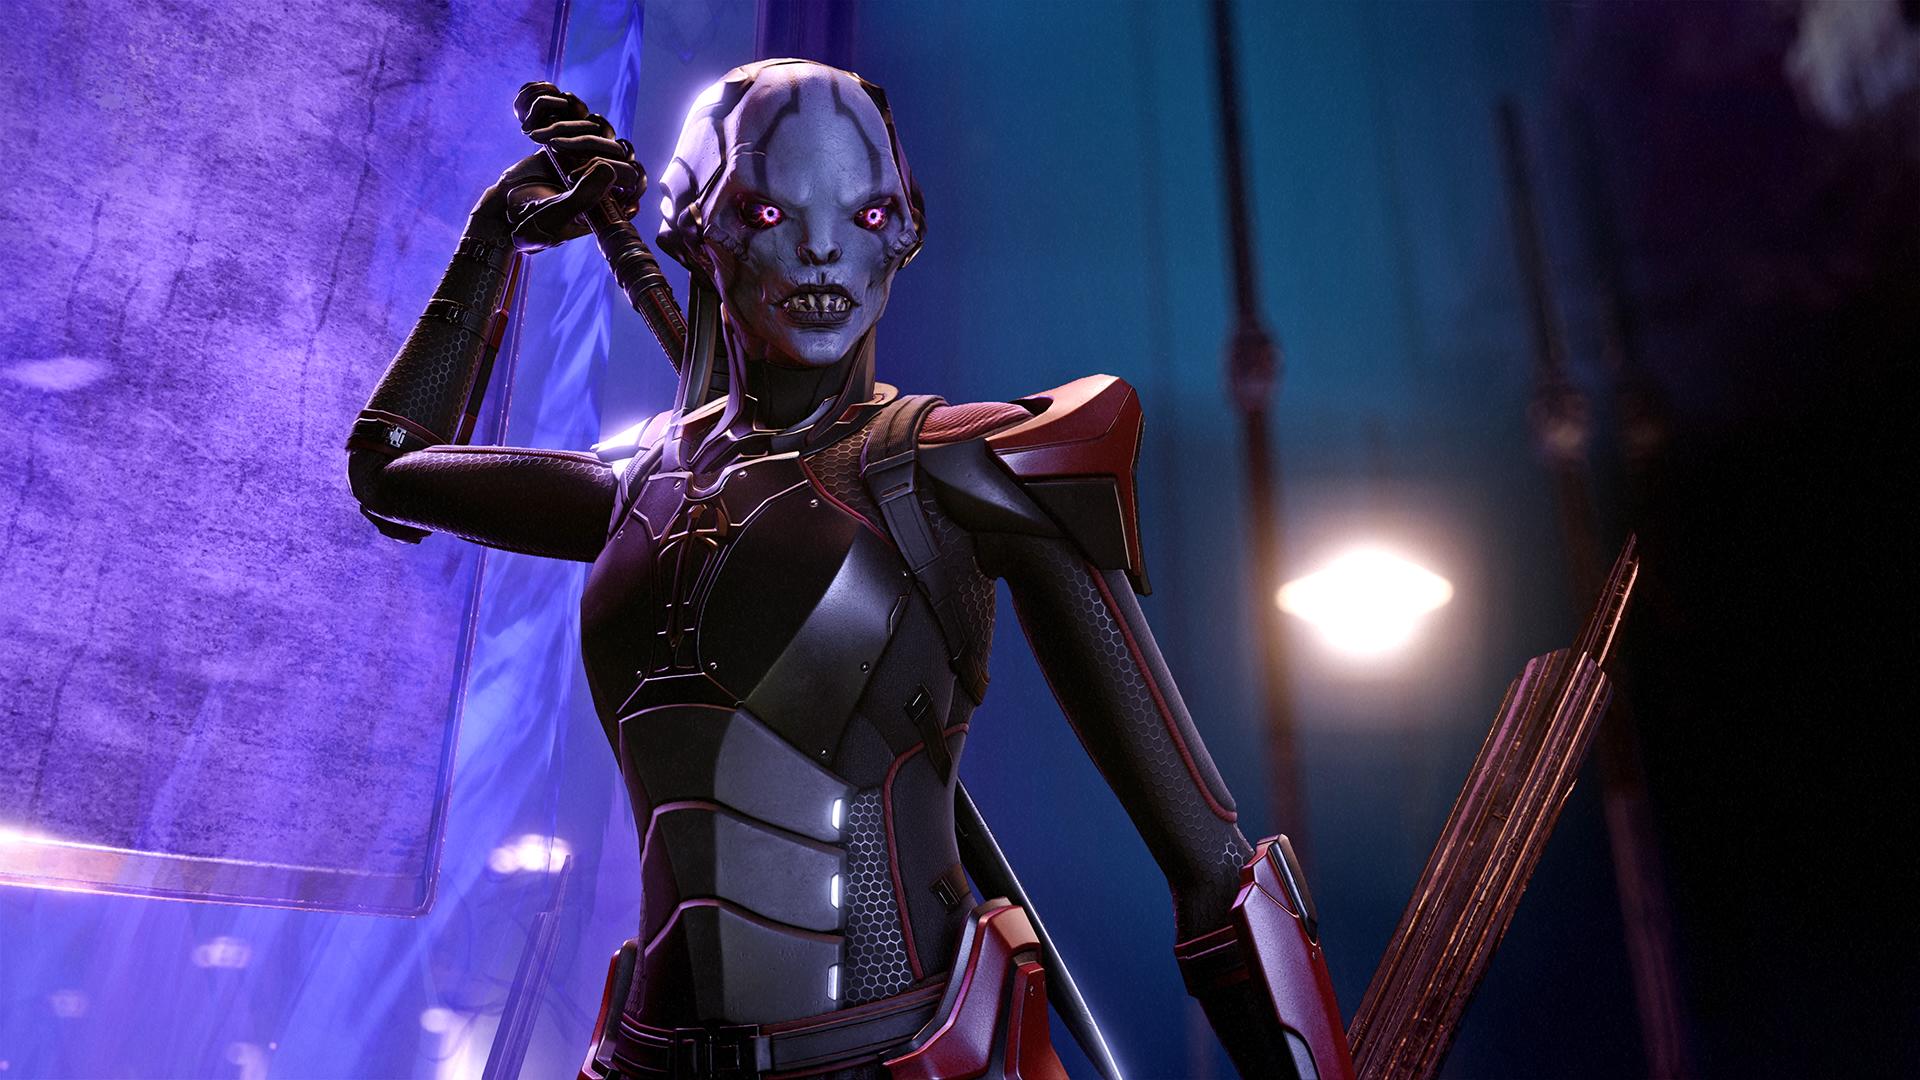 xcom 2 pc version started using controller prompts